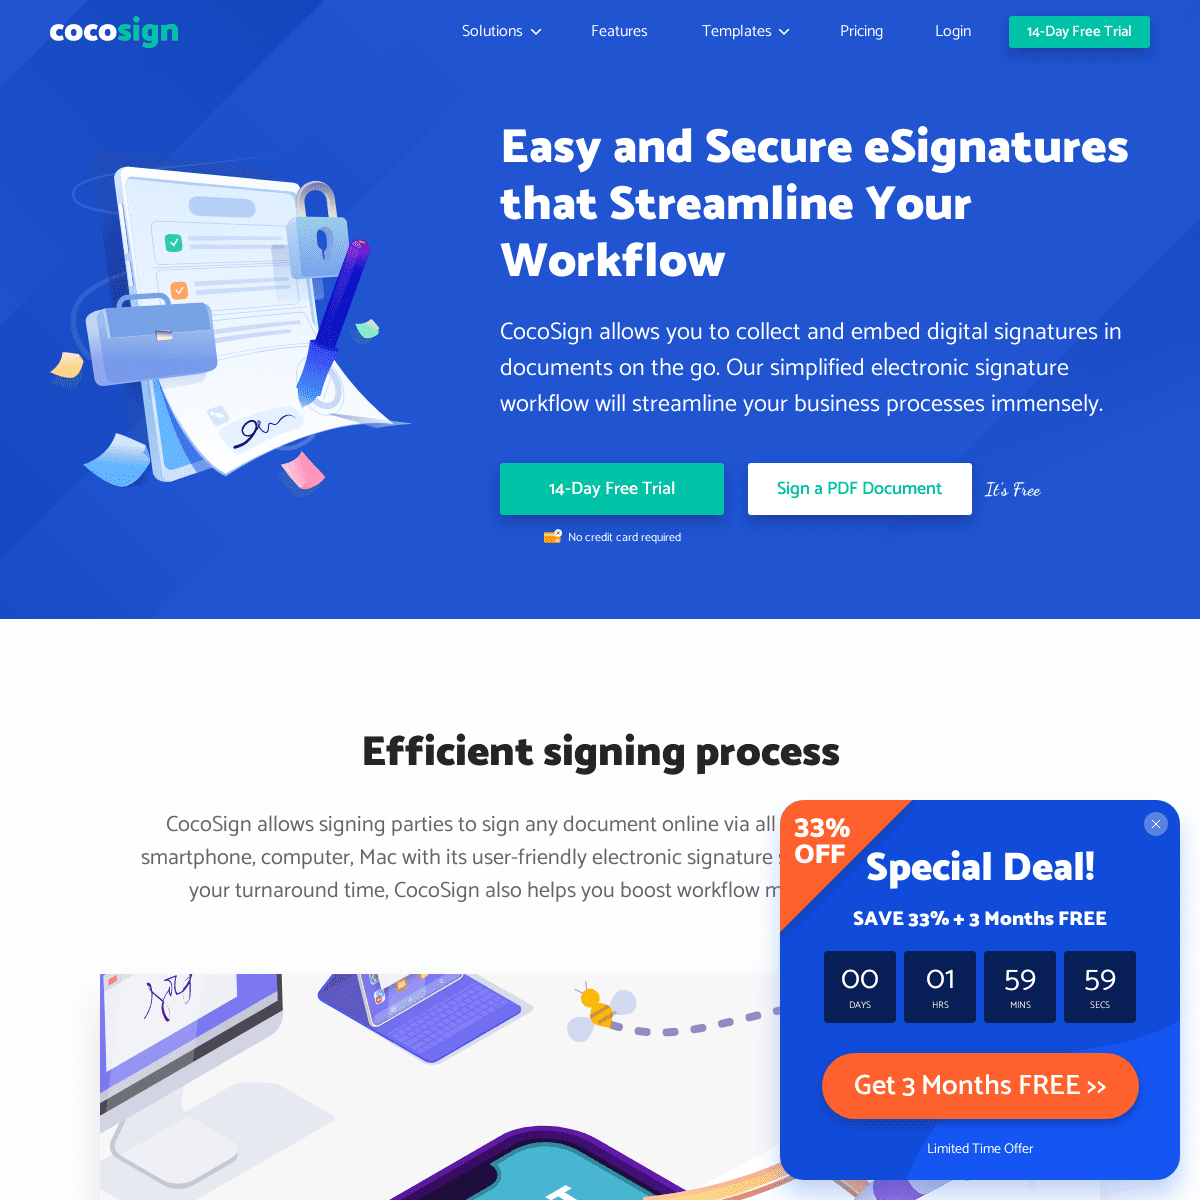 A complete backup of https://cocosign.com